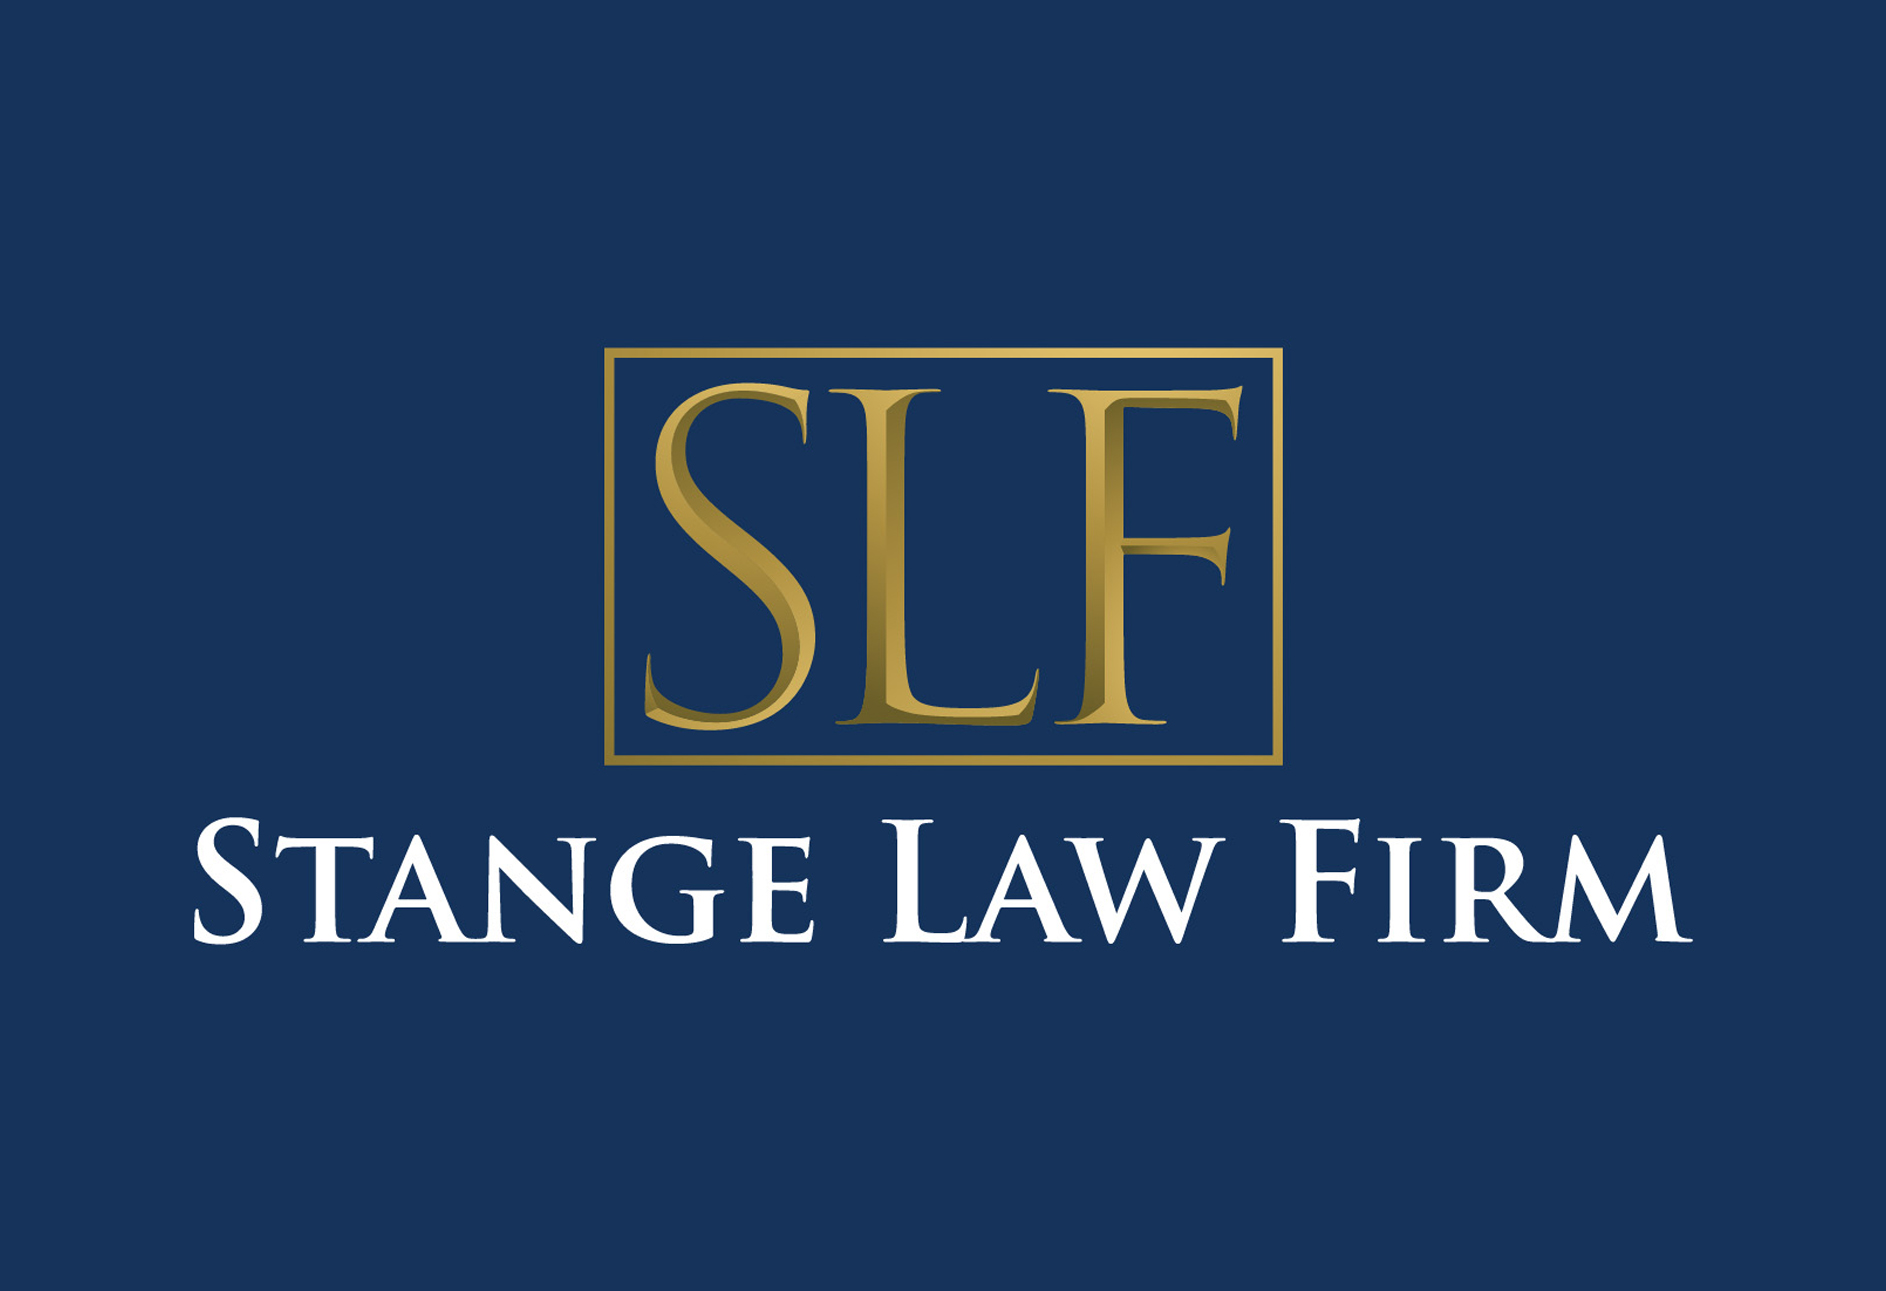 Stange Law Firm, PC Hires Family Lawyers Chris Kellogg and Gregory Holmquist in Overland Park, Kansas